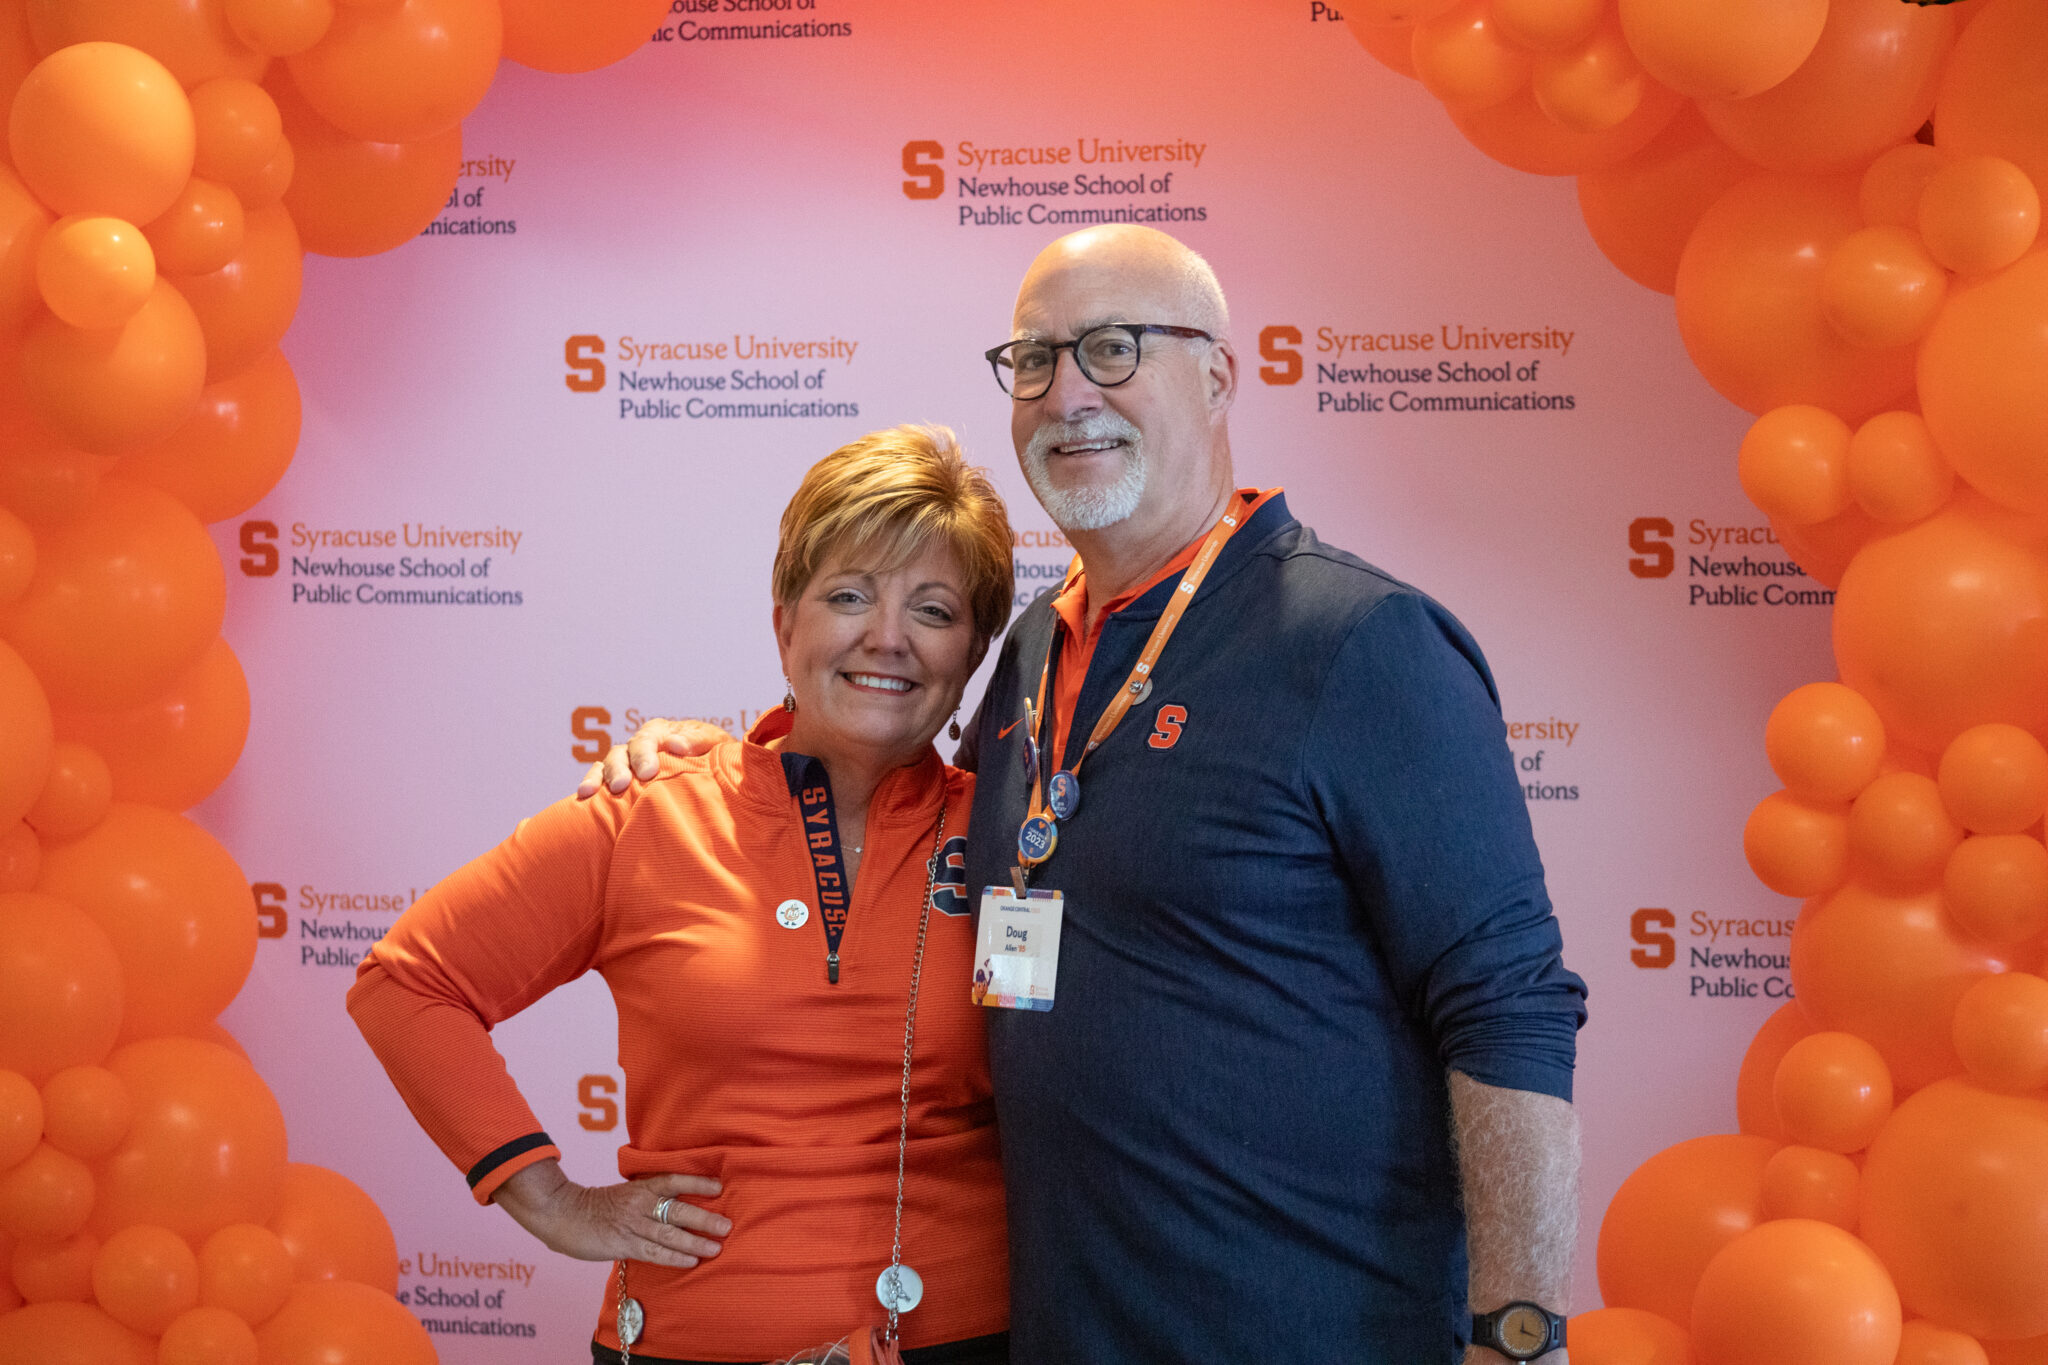 two people pose together in front of orange balloons and smile